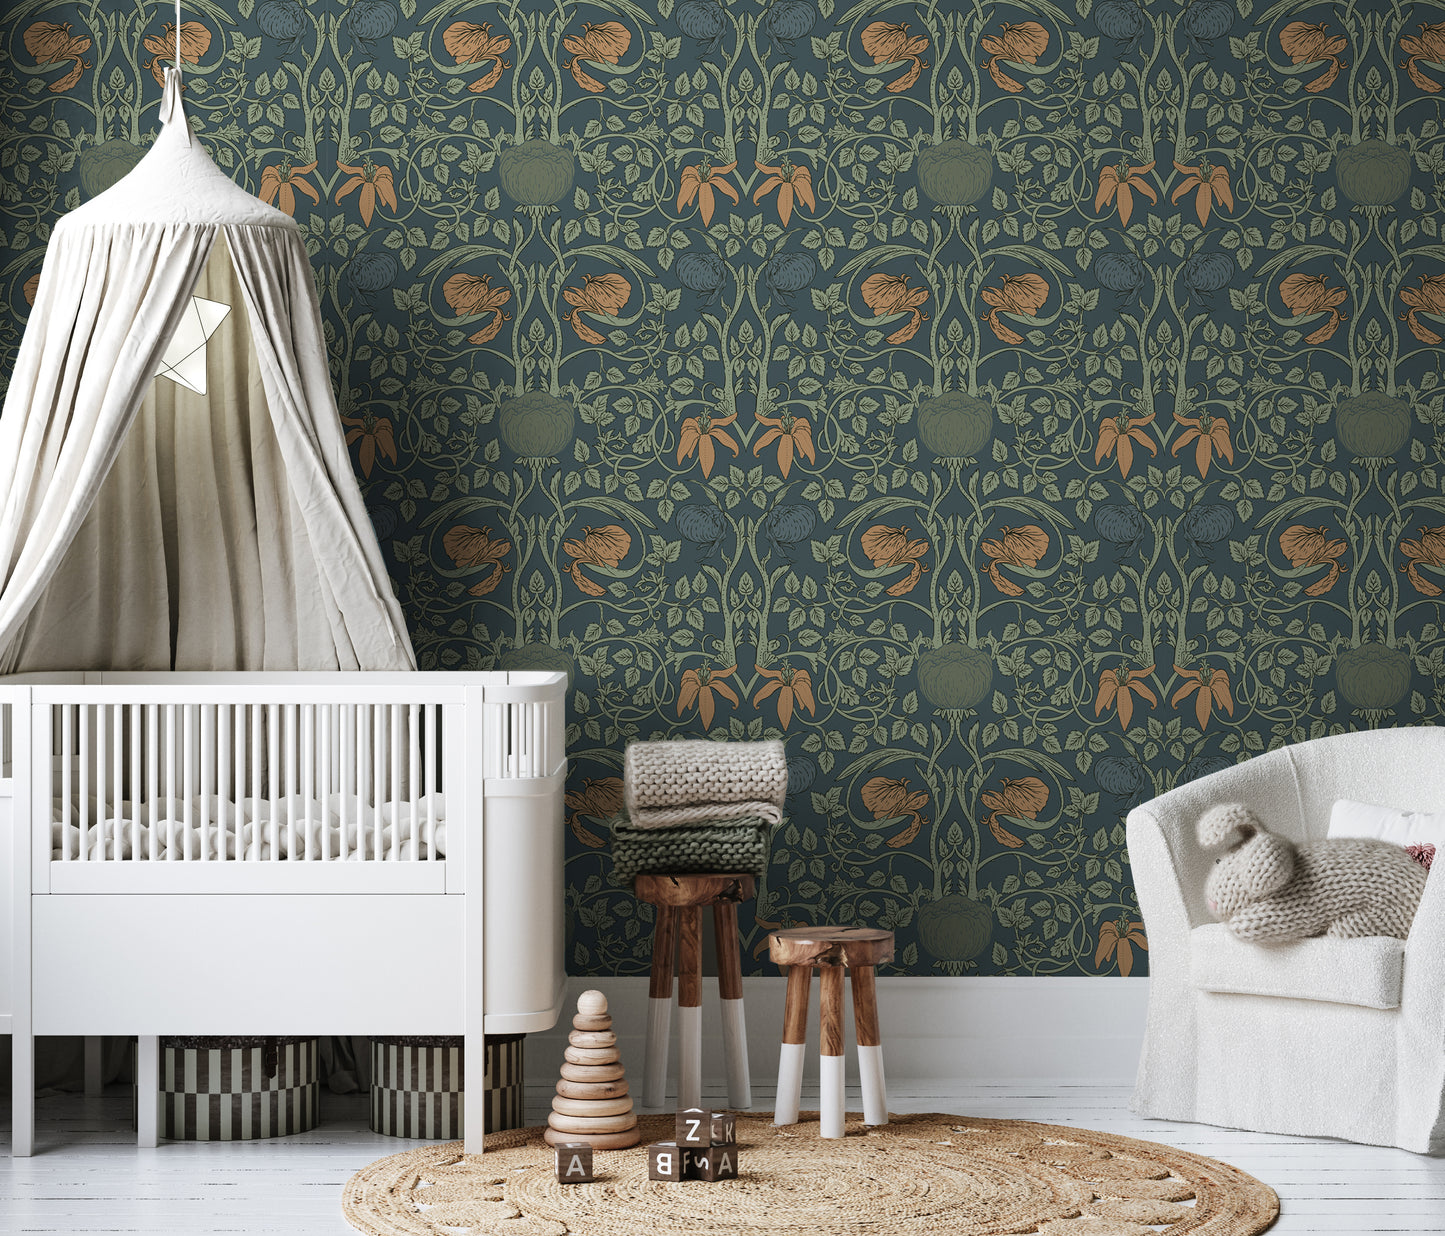 Retro Tulip Floral Removable Peel And Stick Wallpaper